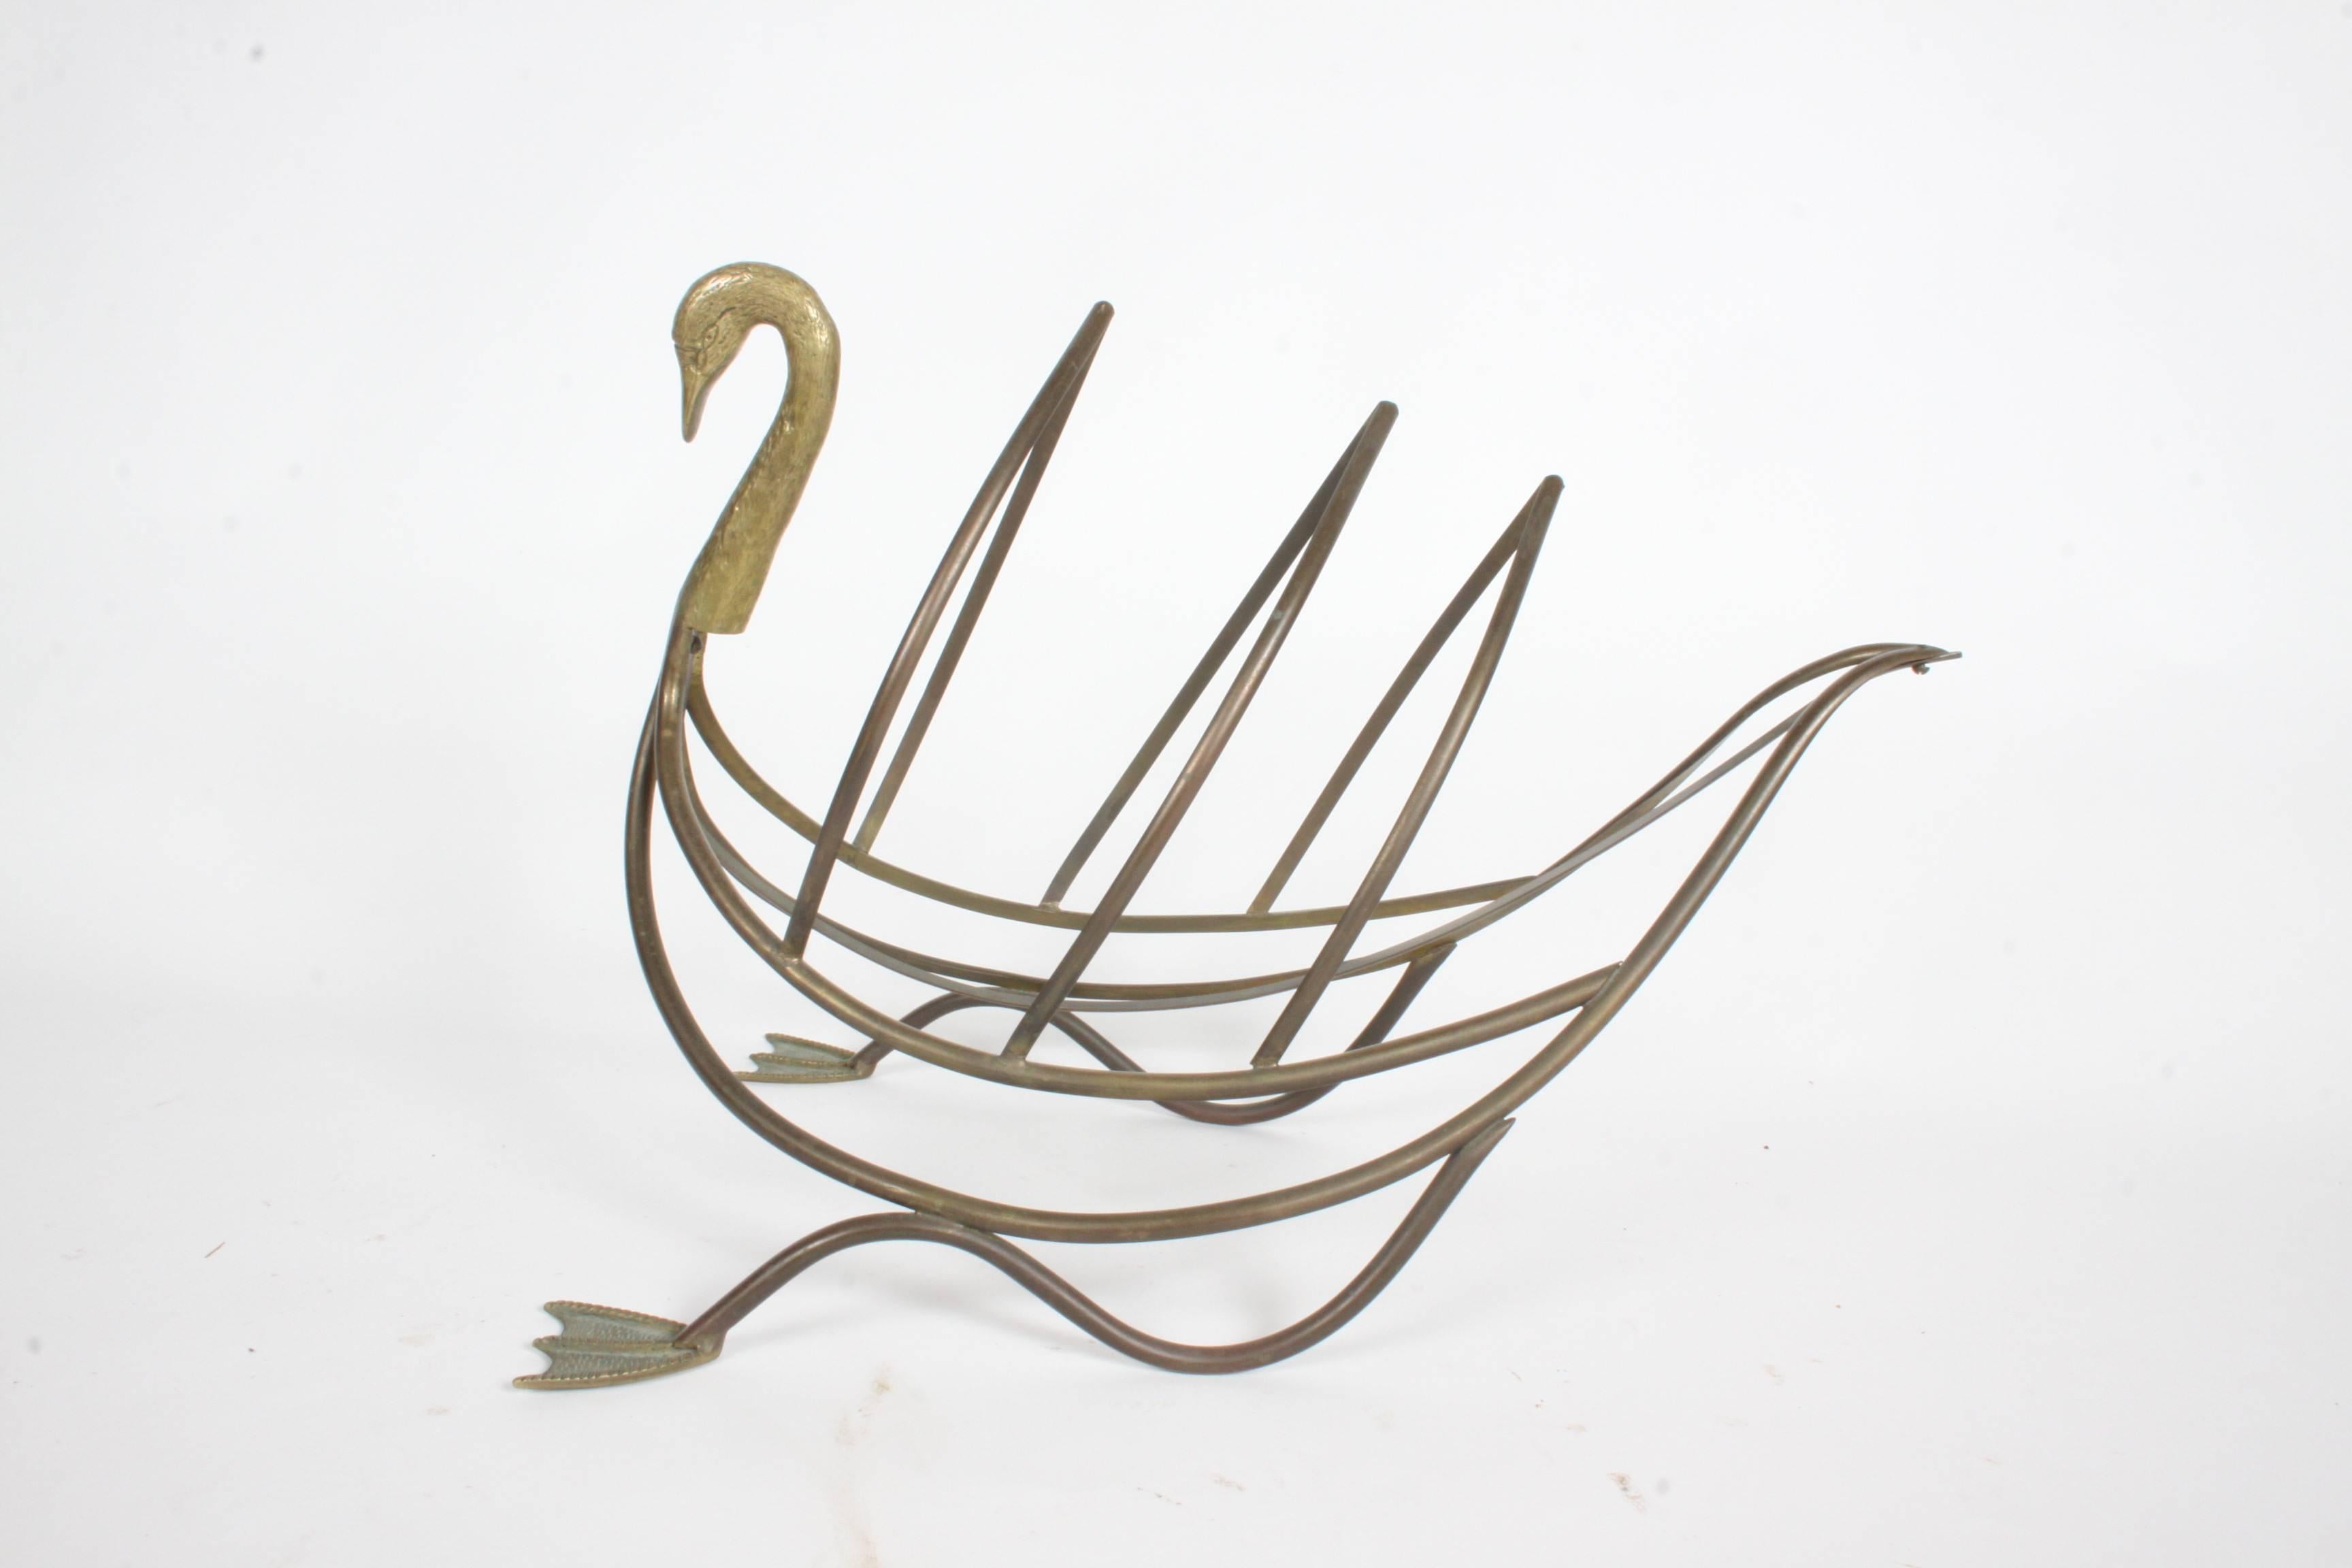 Vintage Maison Jansen style brass swan magazine rack or book holder, stamped Made in Italy.